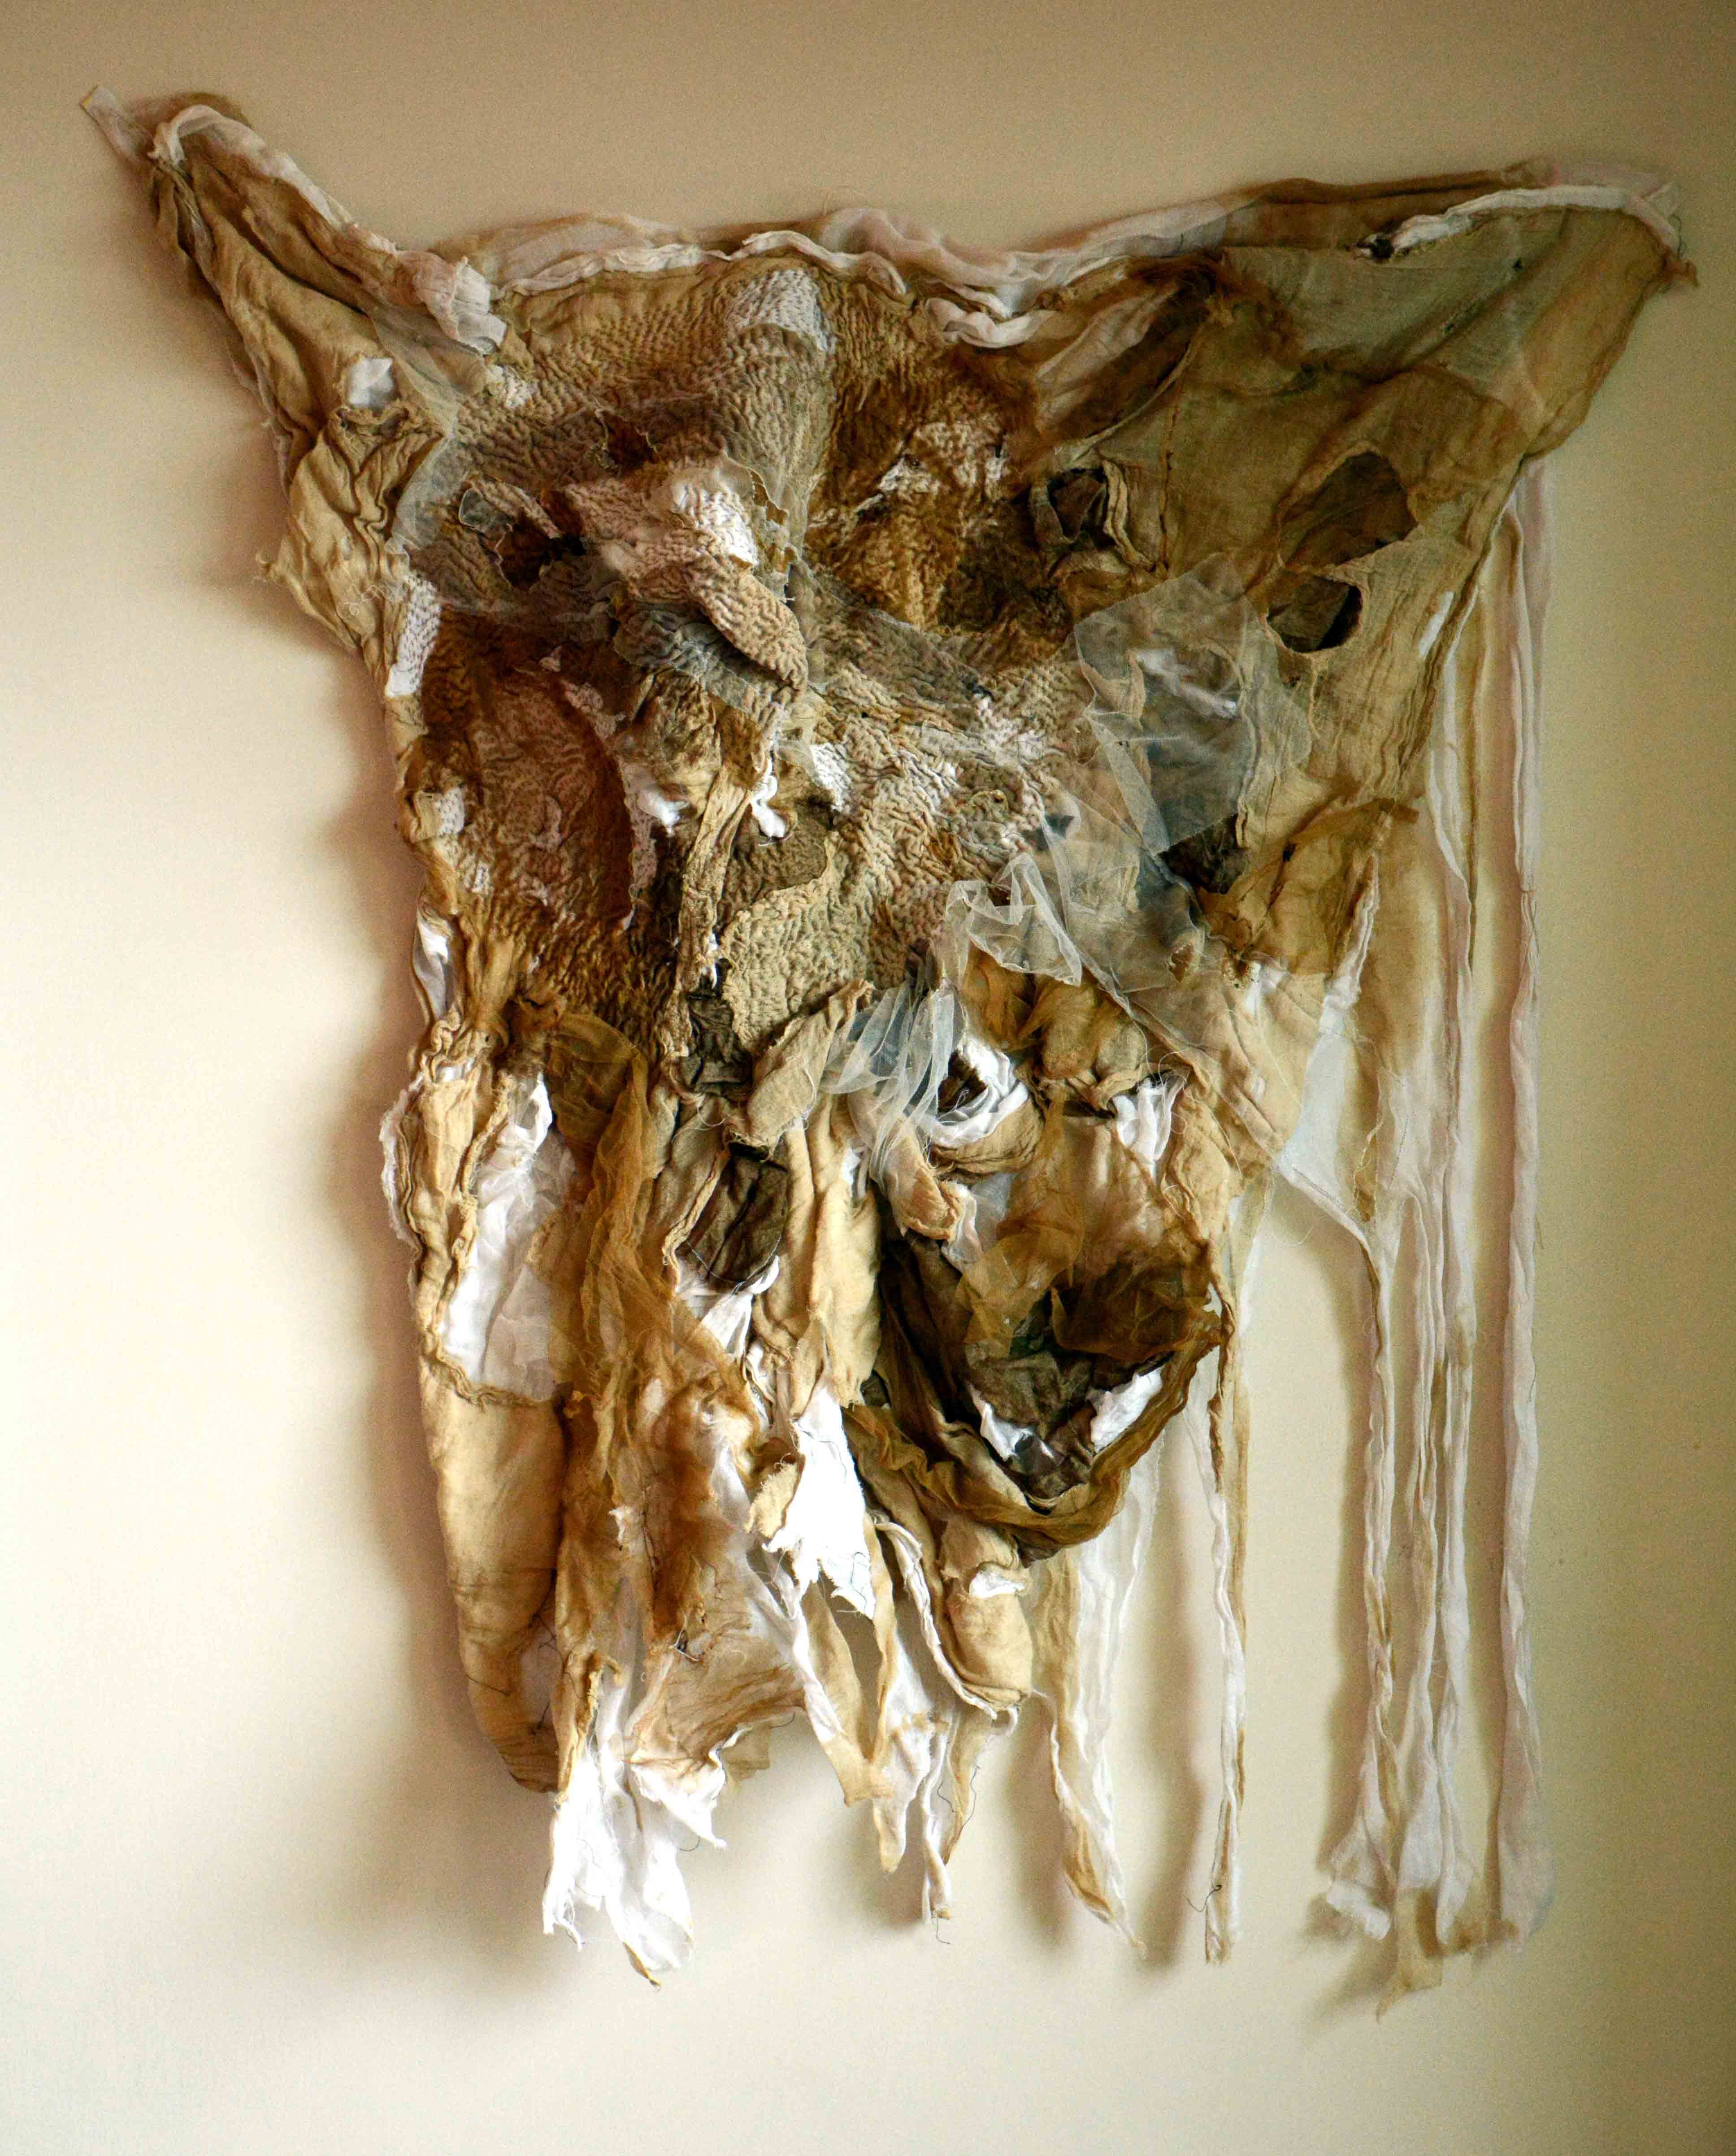 Self-doubt, 2014, [34.75 x 39 inches – unframed], Materials: cotton fabrics, cotton floss, cotton-polyester thread, Technique: burning, layering, hand-sewing, machine embroidery, staining with tea-leaves